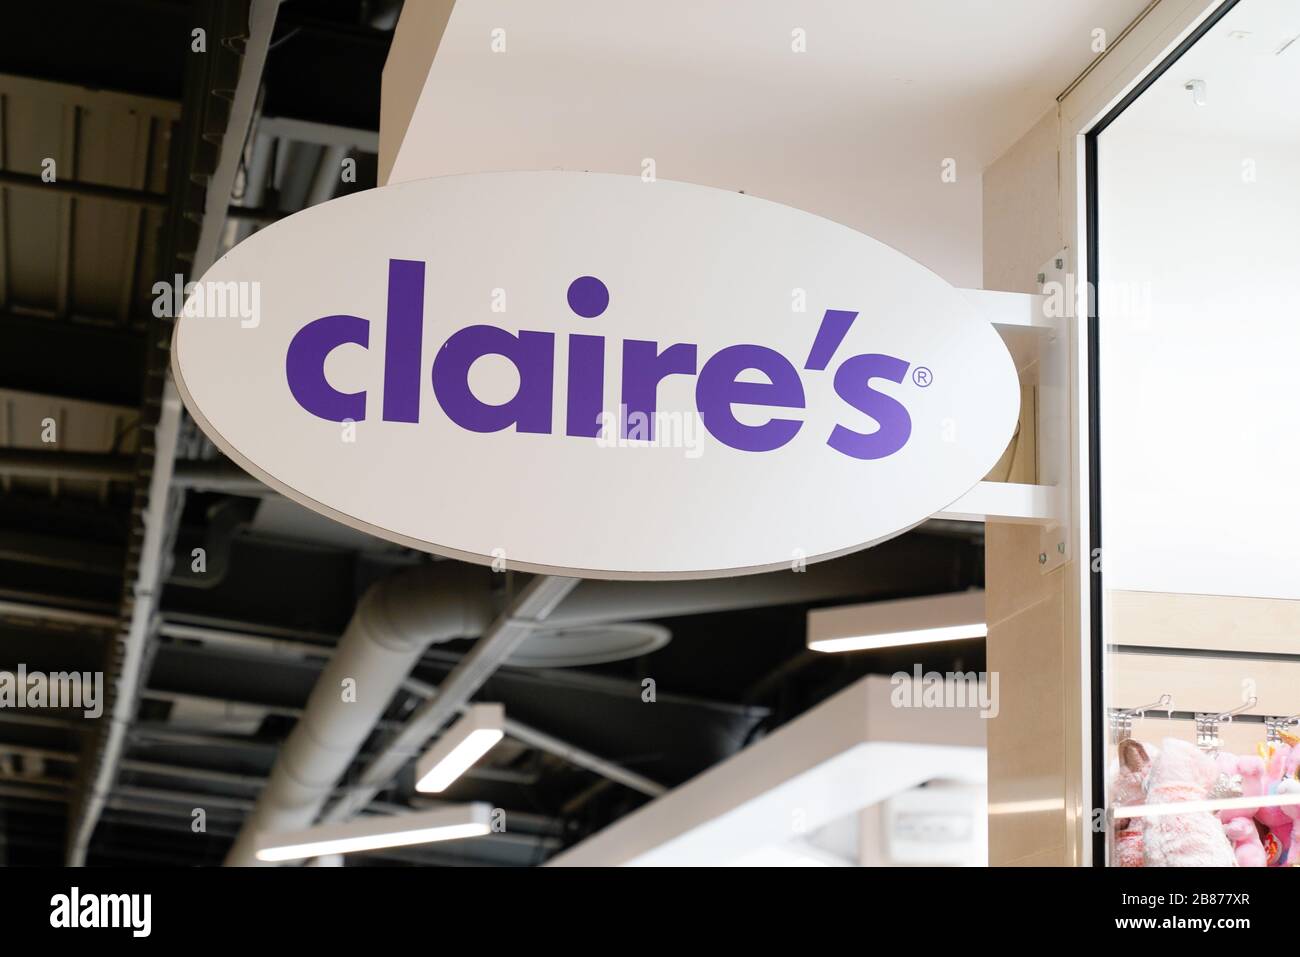 Bordeaux , Aquitaine / France - 01 15 2020 : claires store sign logo Claire's shop retailer of accessories and jewelry girls teenagers Stock Photo